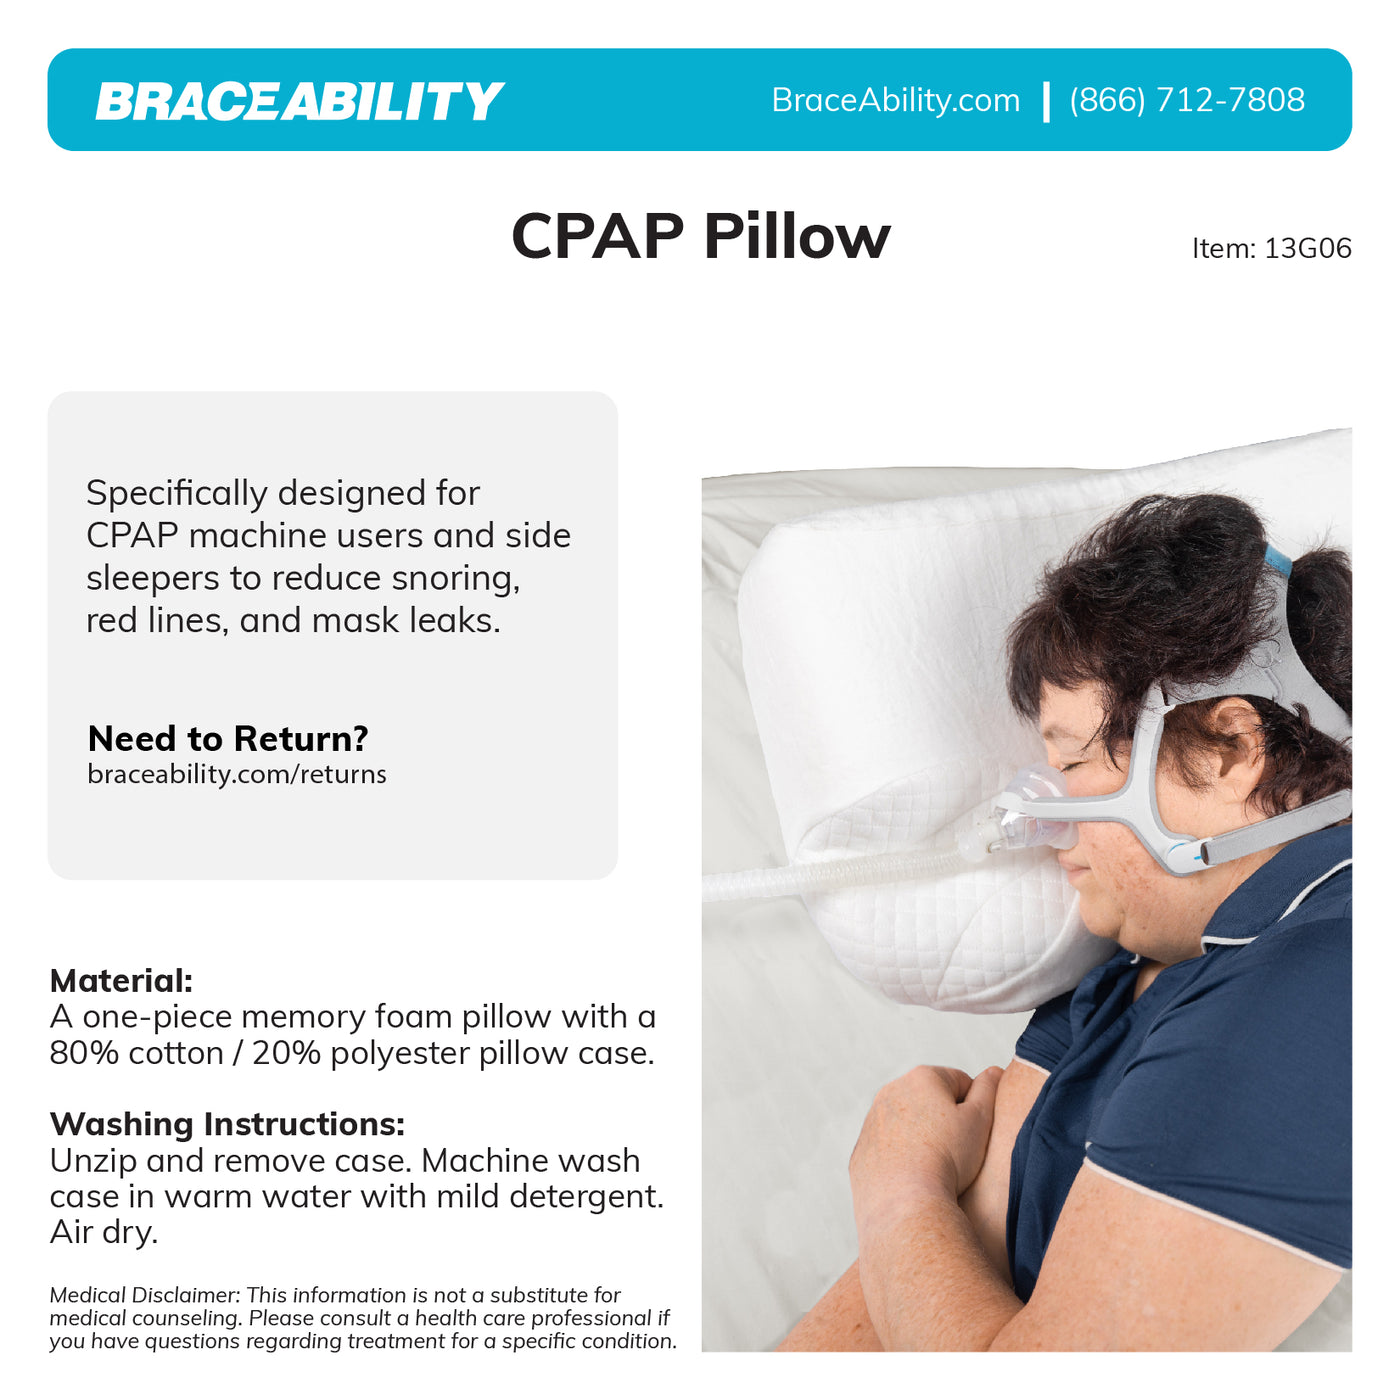 to clean the cpap pillow, remove the case and wash in warm water with mild detergent.